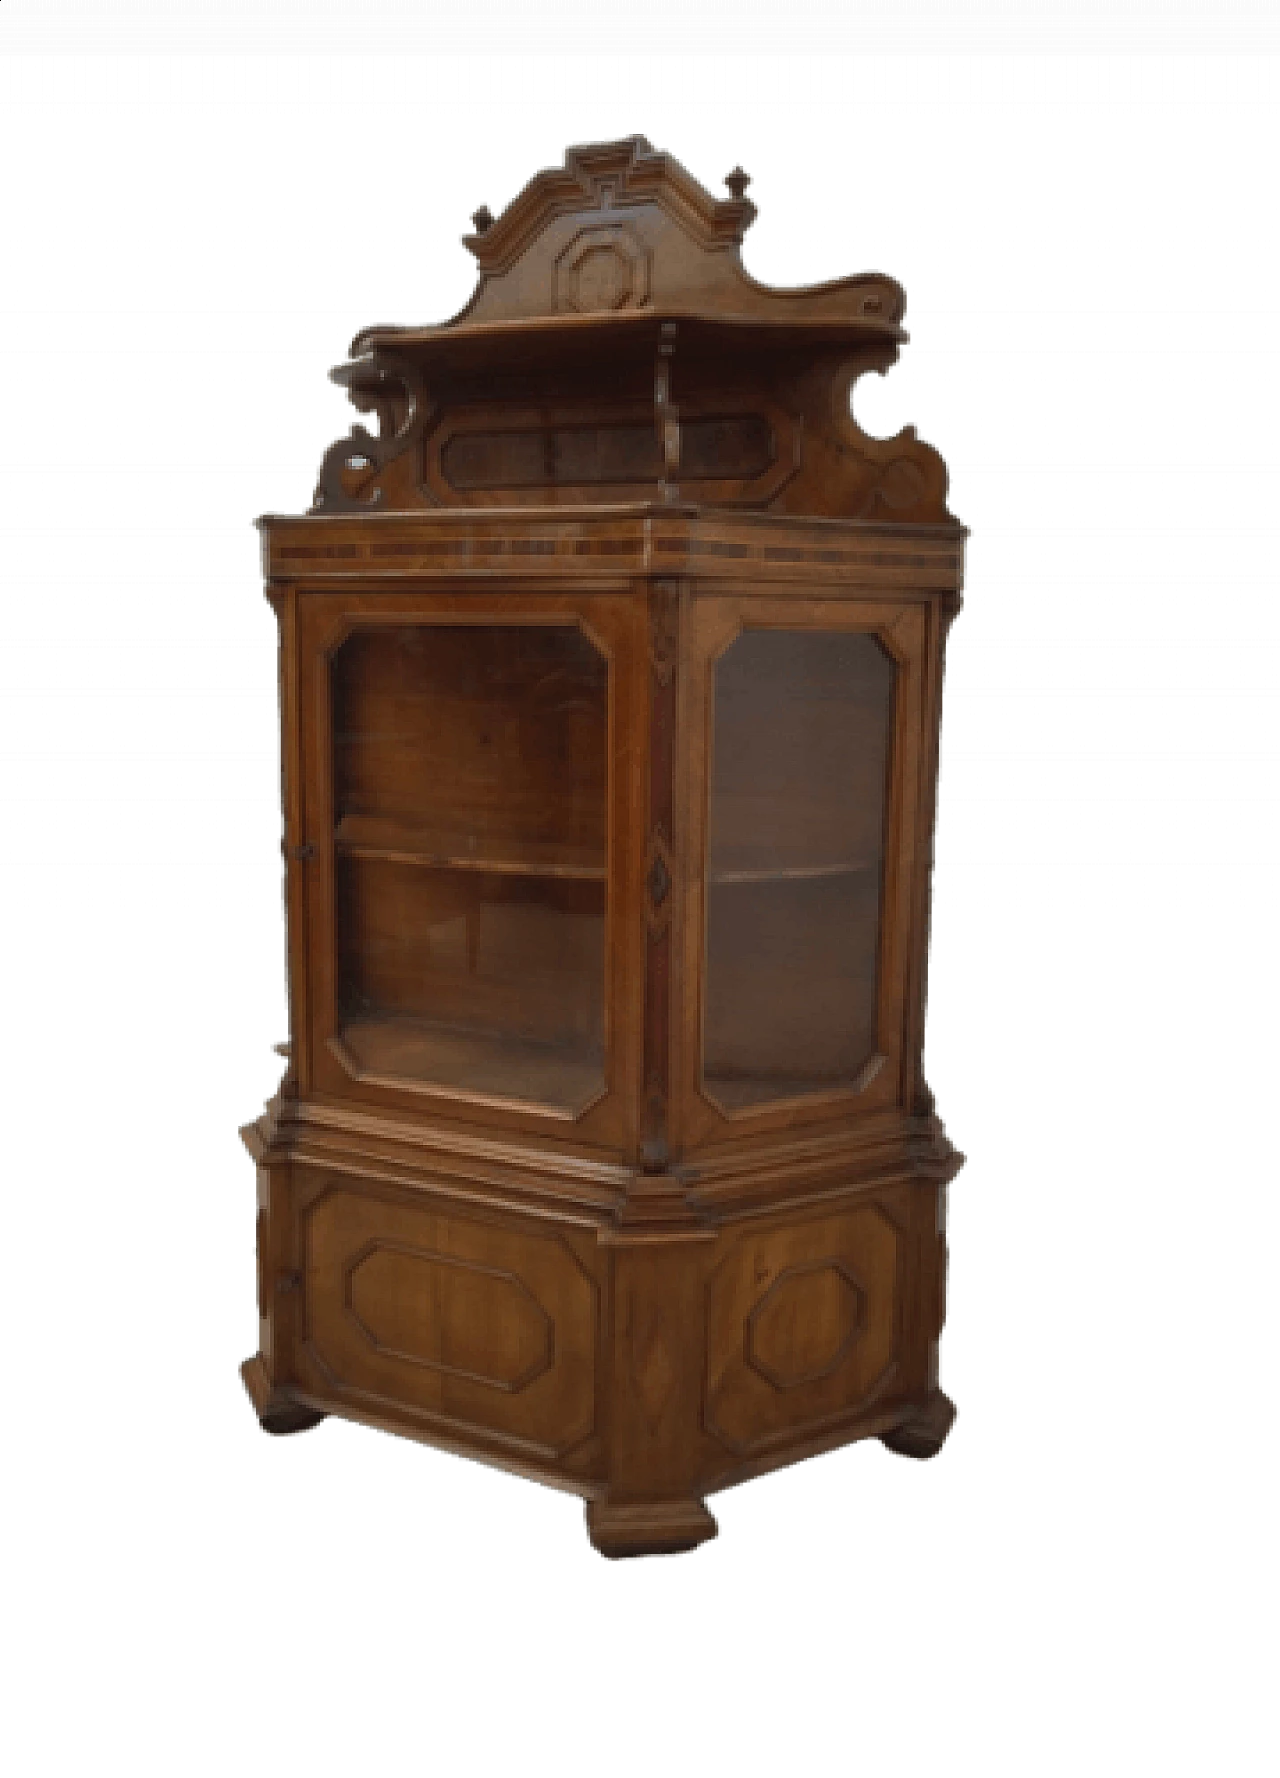 Two-part display case in walnut, spruce and glass, 19th century 1477113